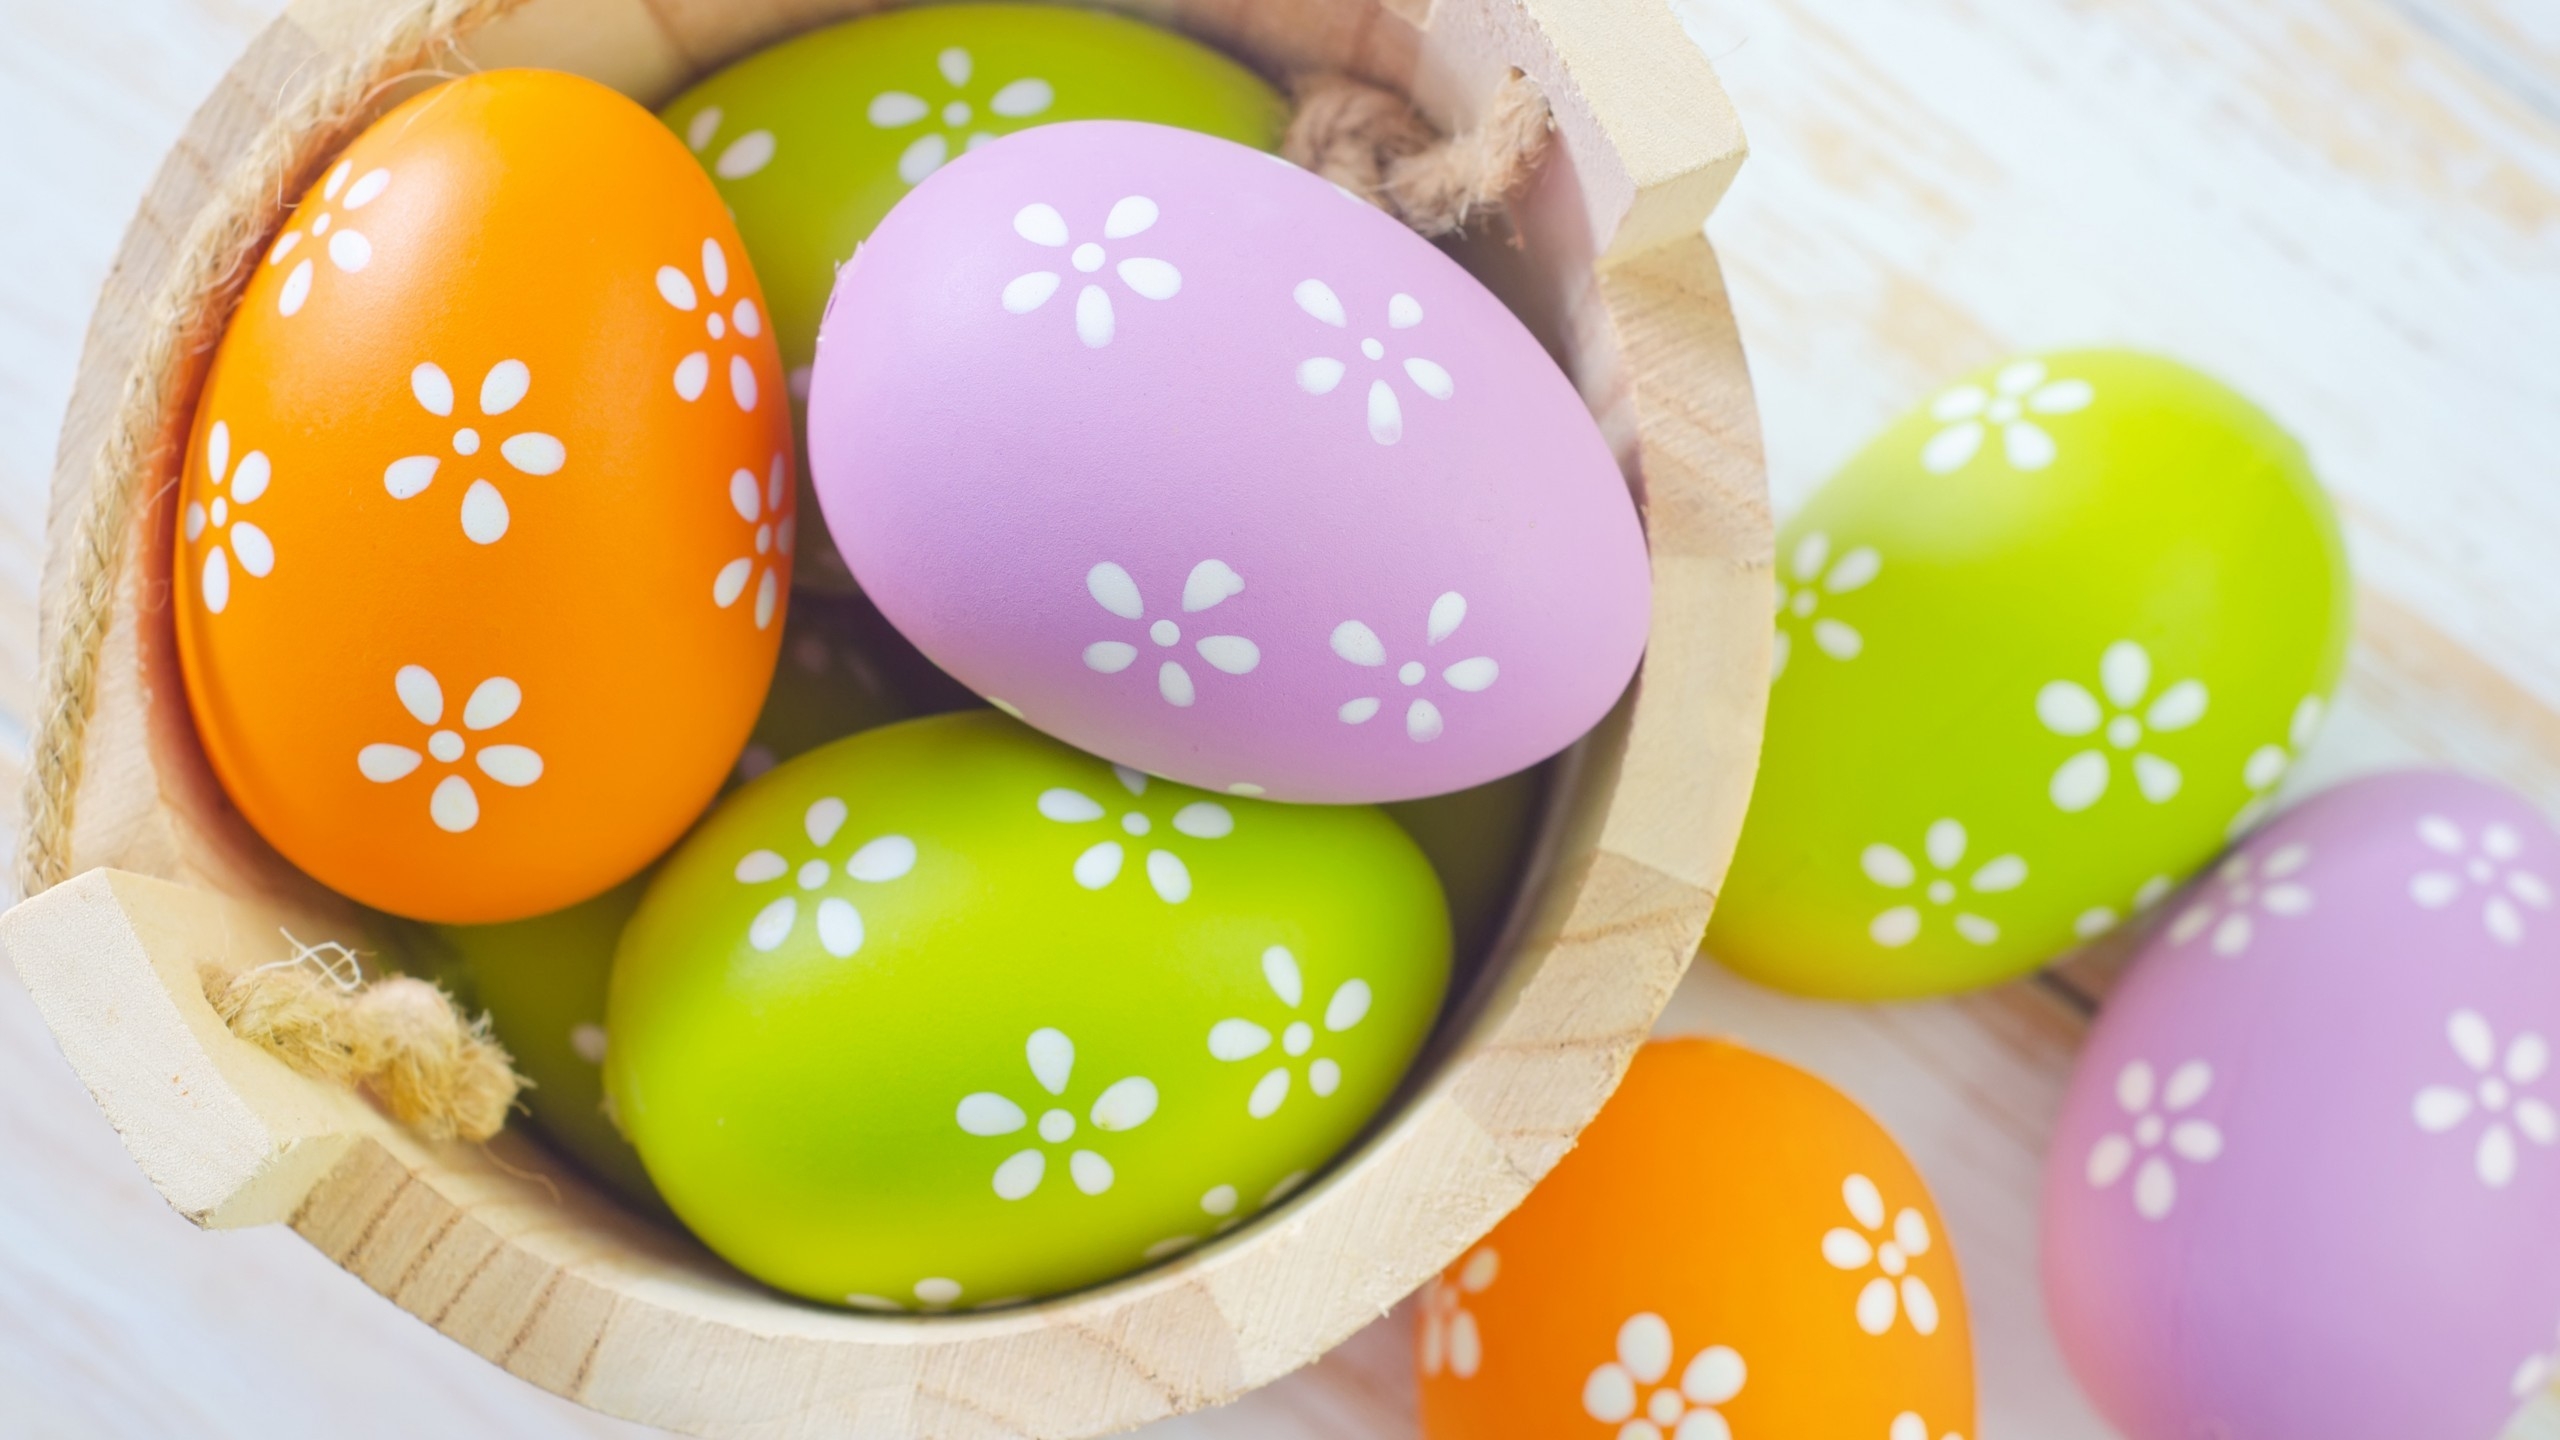 Beautiful 2014 Easter Eggs for 2560x1440 HDTV resolution